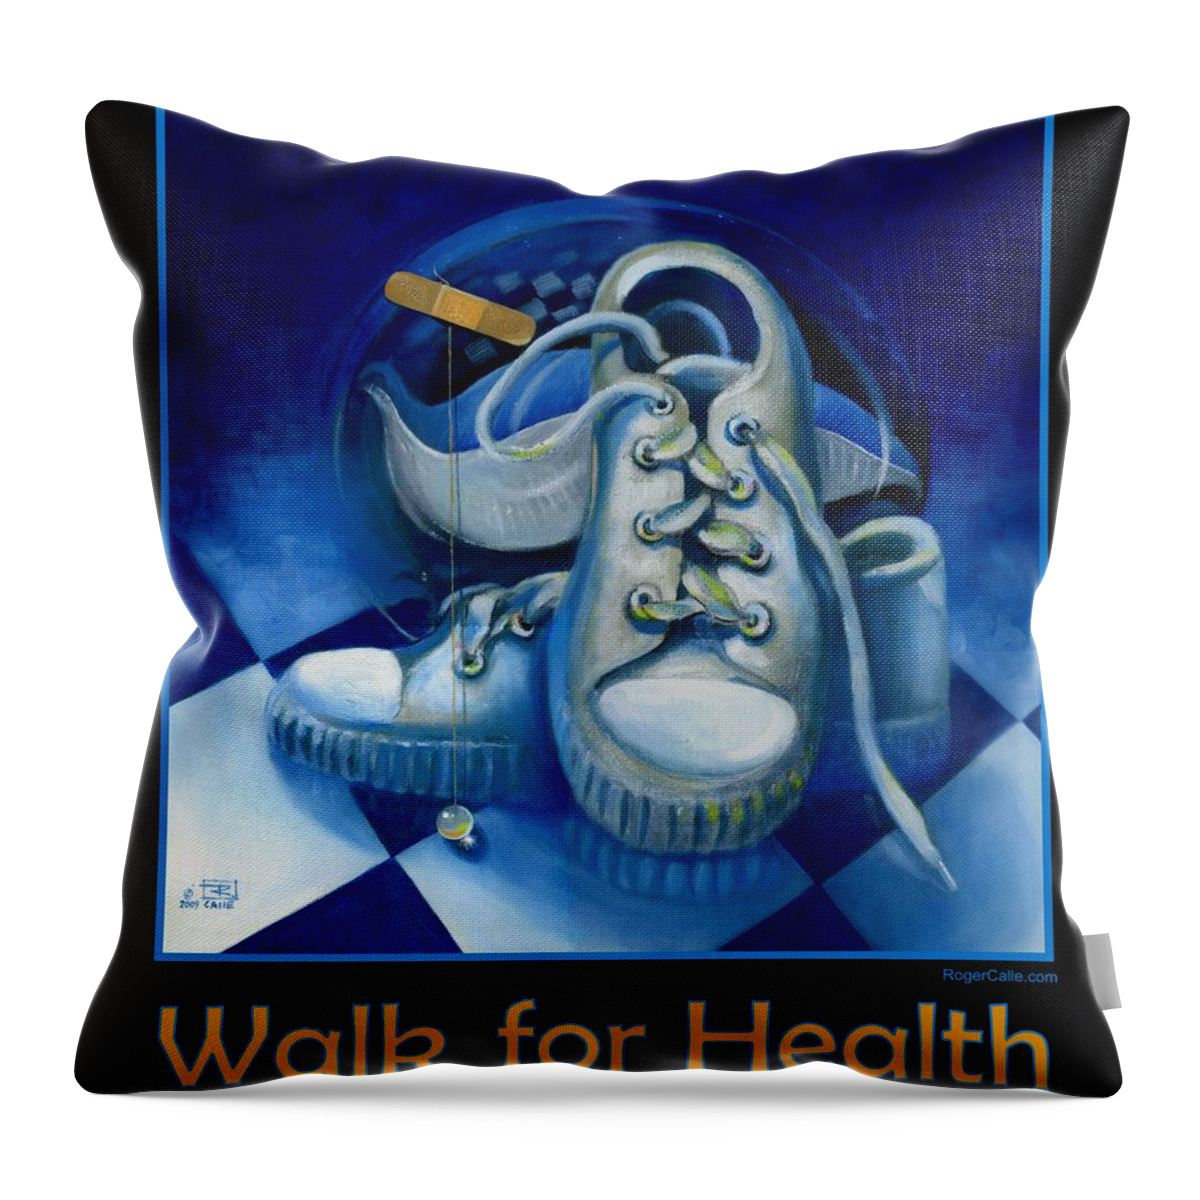 Surrealism Throw Pillow featuring the painting Walk for Health Poster by Roger Calle